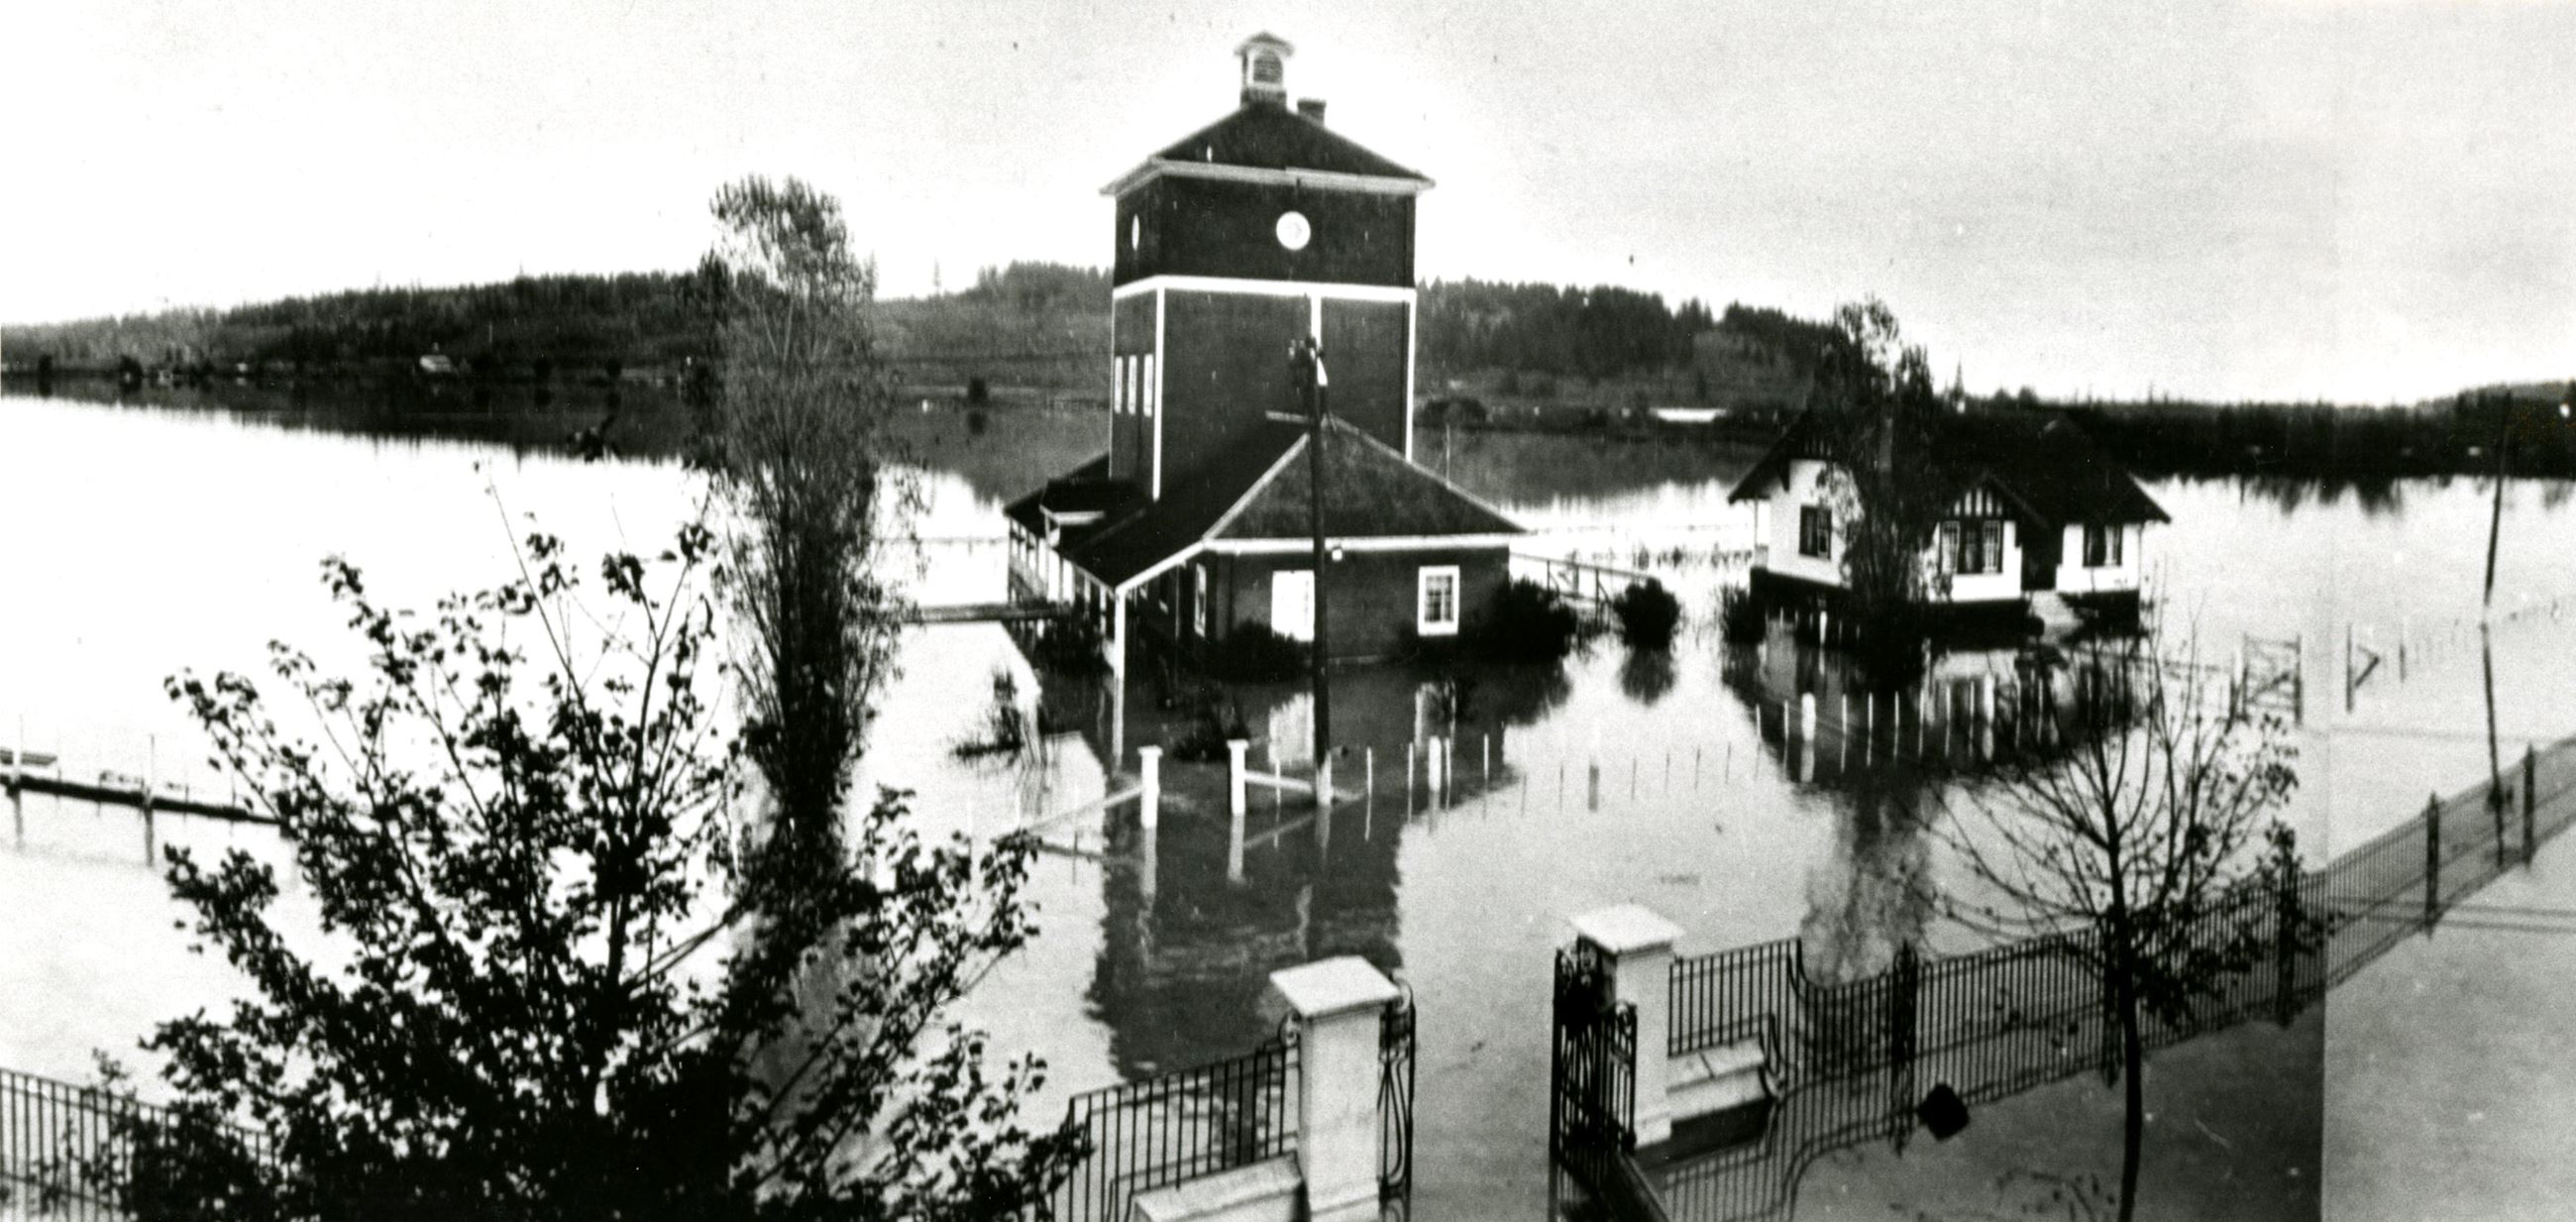 Farm buildings under water at Colony Farm, 1948 (Source City of Coquitlam Archives, C6.639) Opens in new window